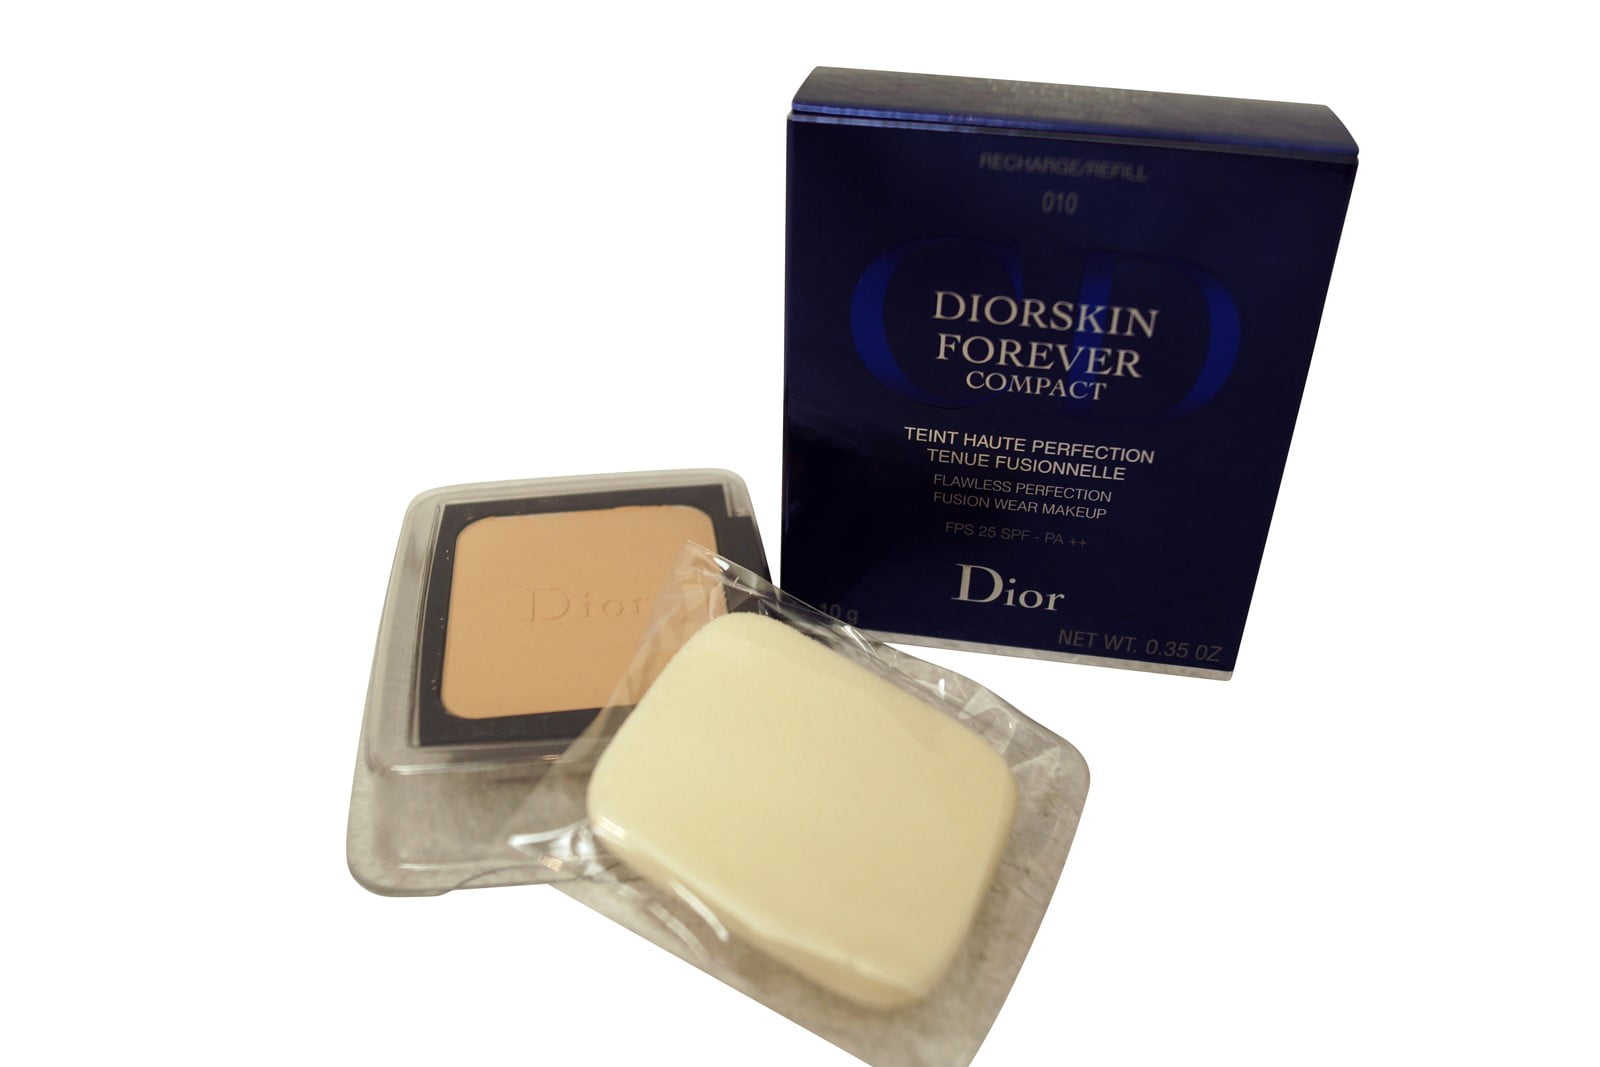 Christian Dior Diorskin Forever Compact 